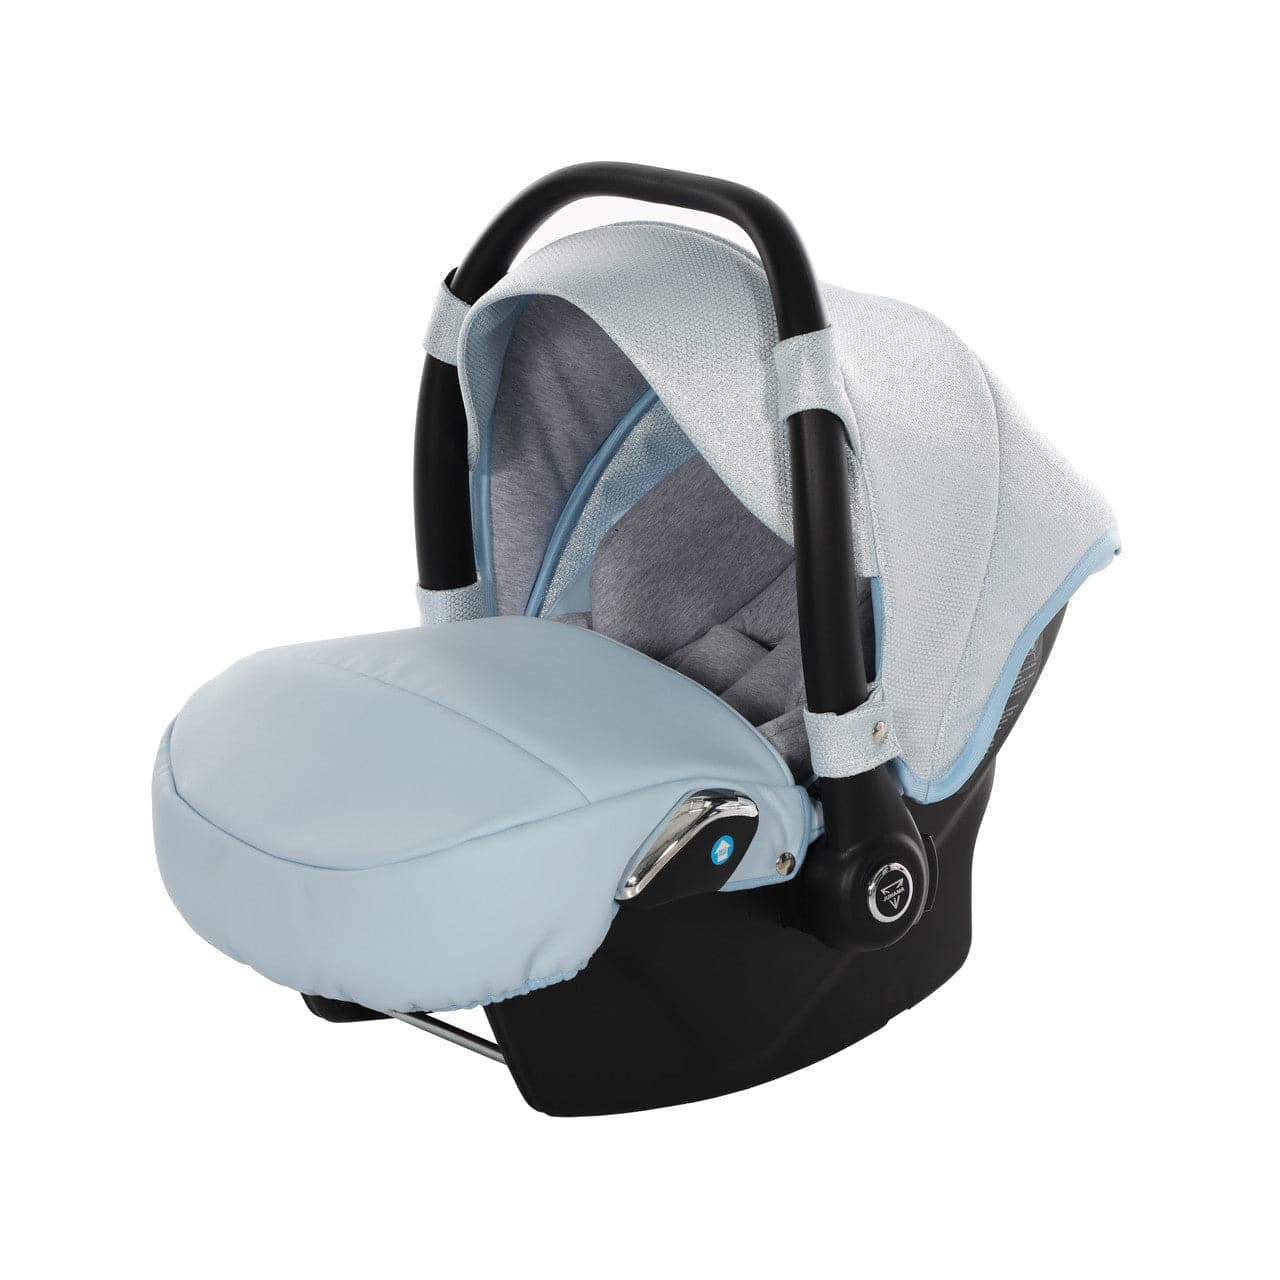 Junama Dolce 3 In 1 Travel System - Blue -  | For Your Little One